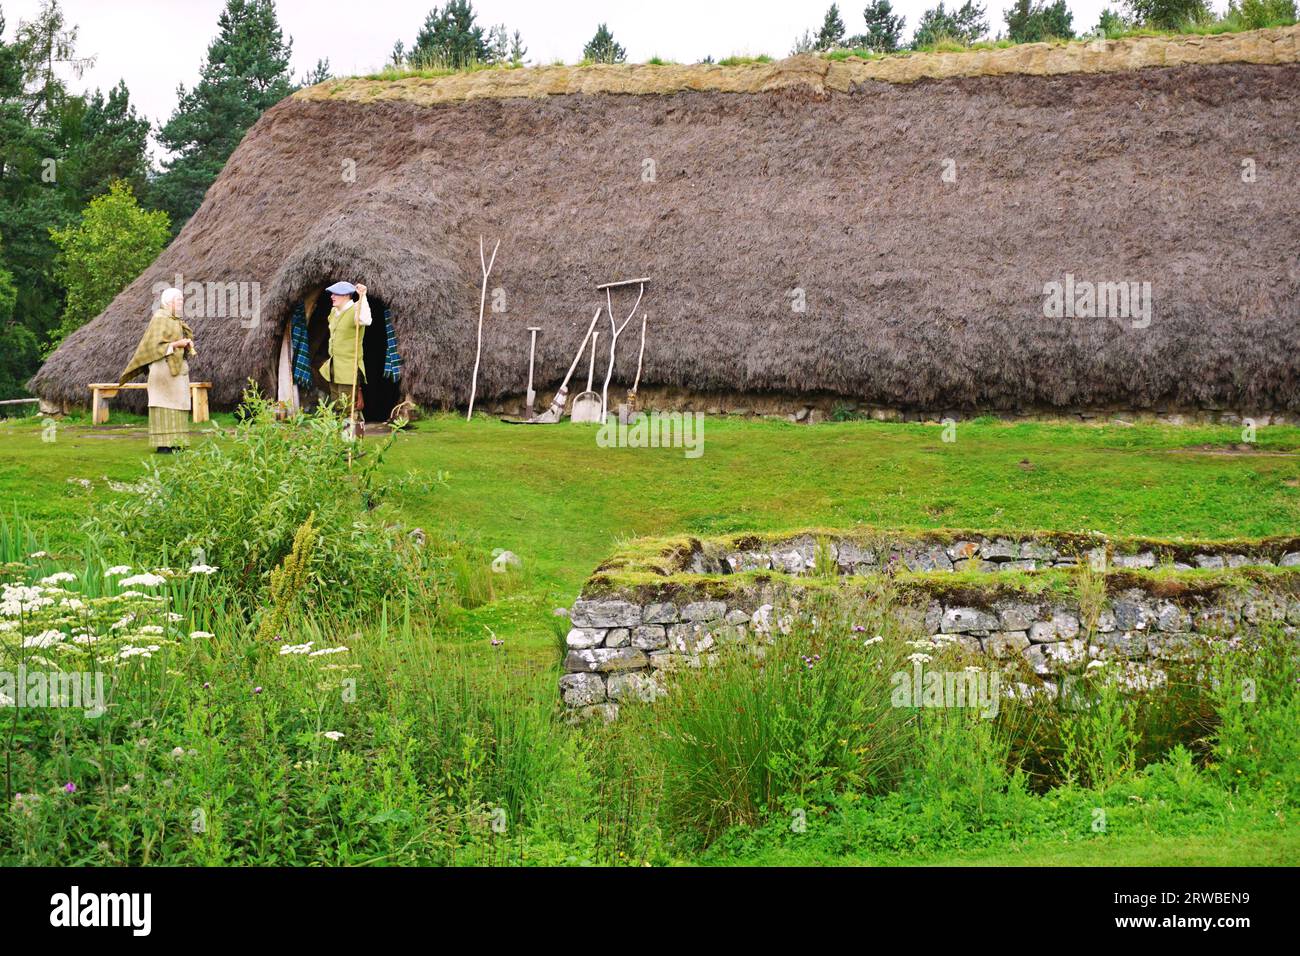 Reconstruction of a large 1700s thatched roof house at the Highland Folk Museum, an open air museum sharing the history of the Scottish Highlands Stock Photo